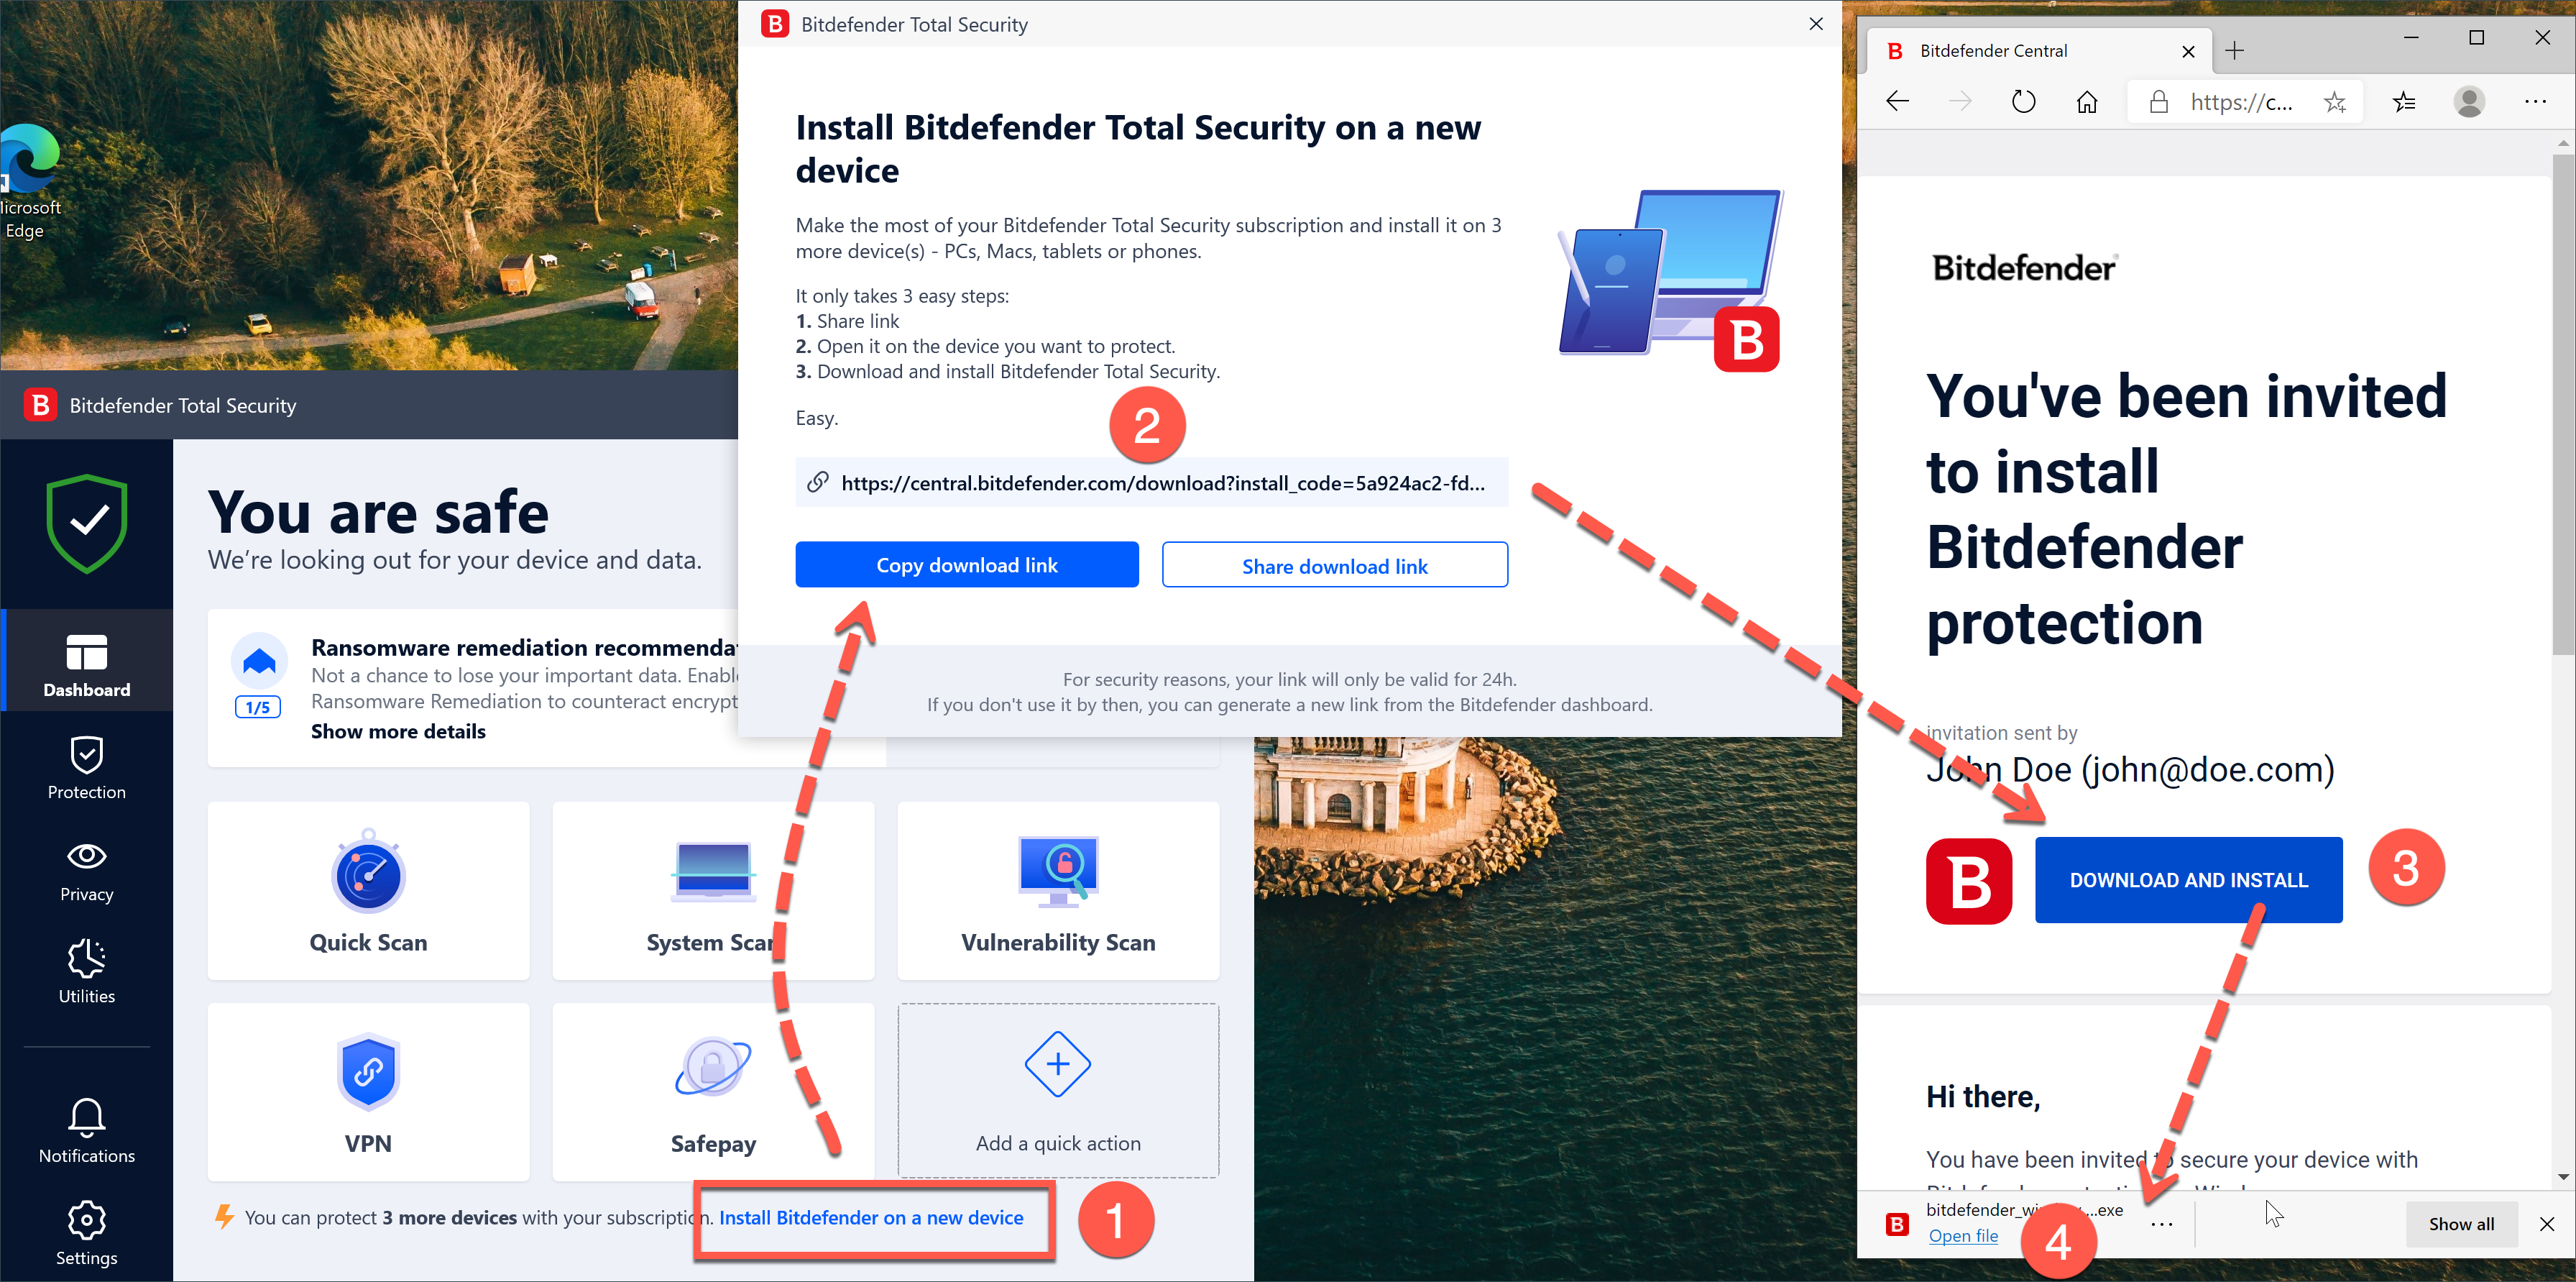 How to install Bitdefender on another device if you already run a copy of Bitdefender on Windows